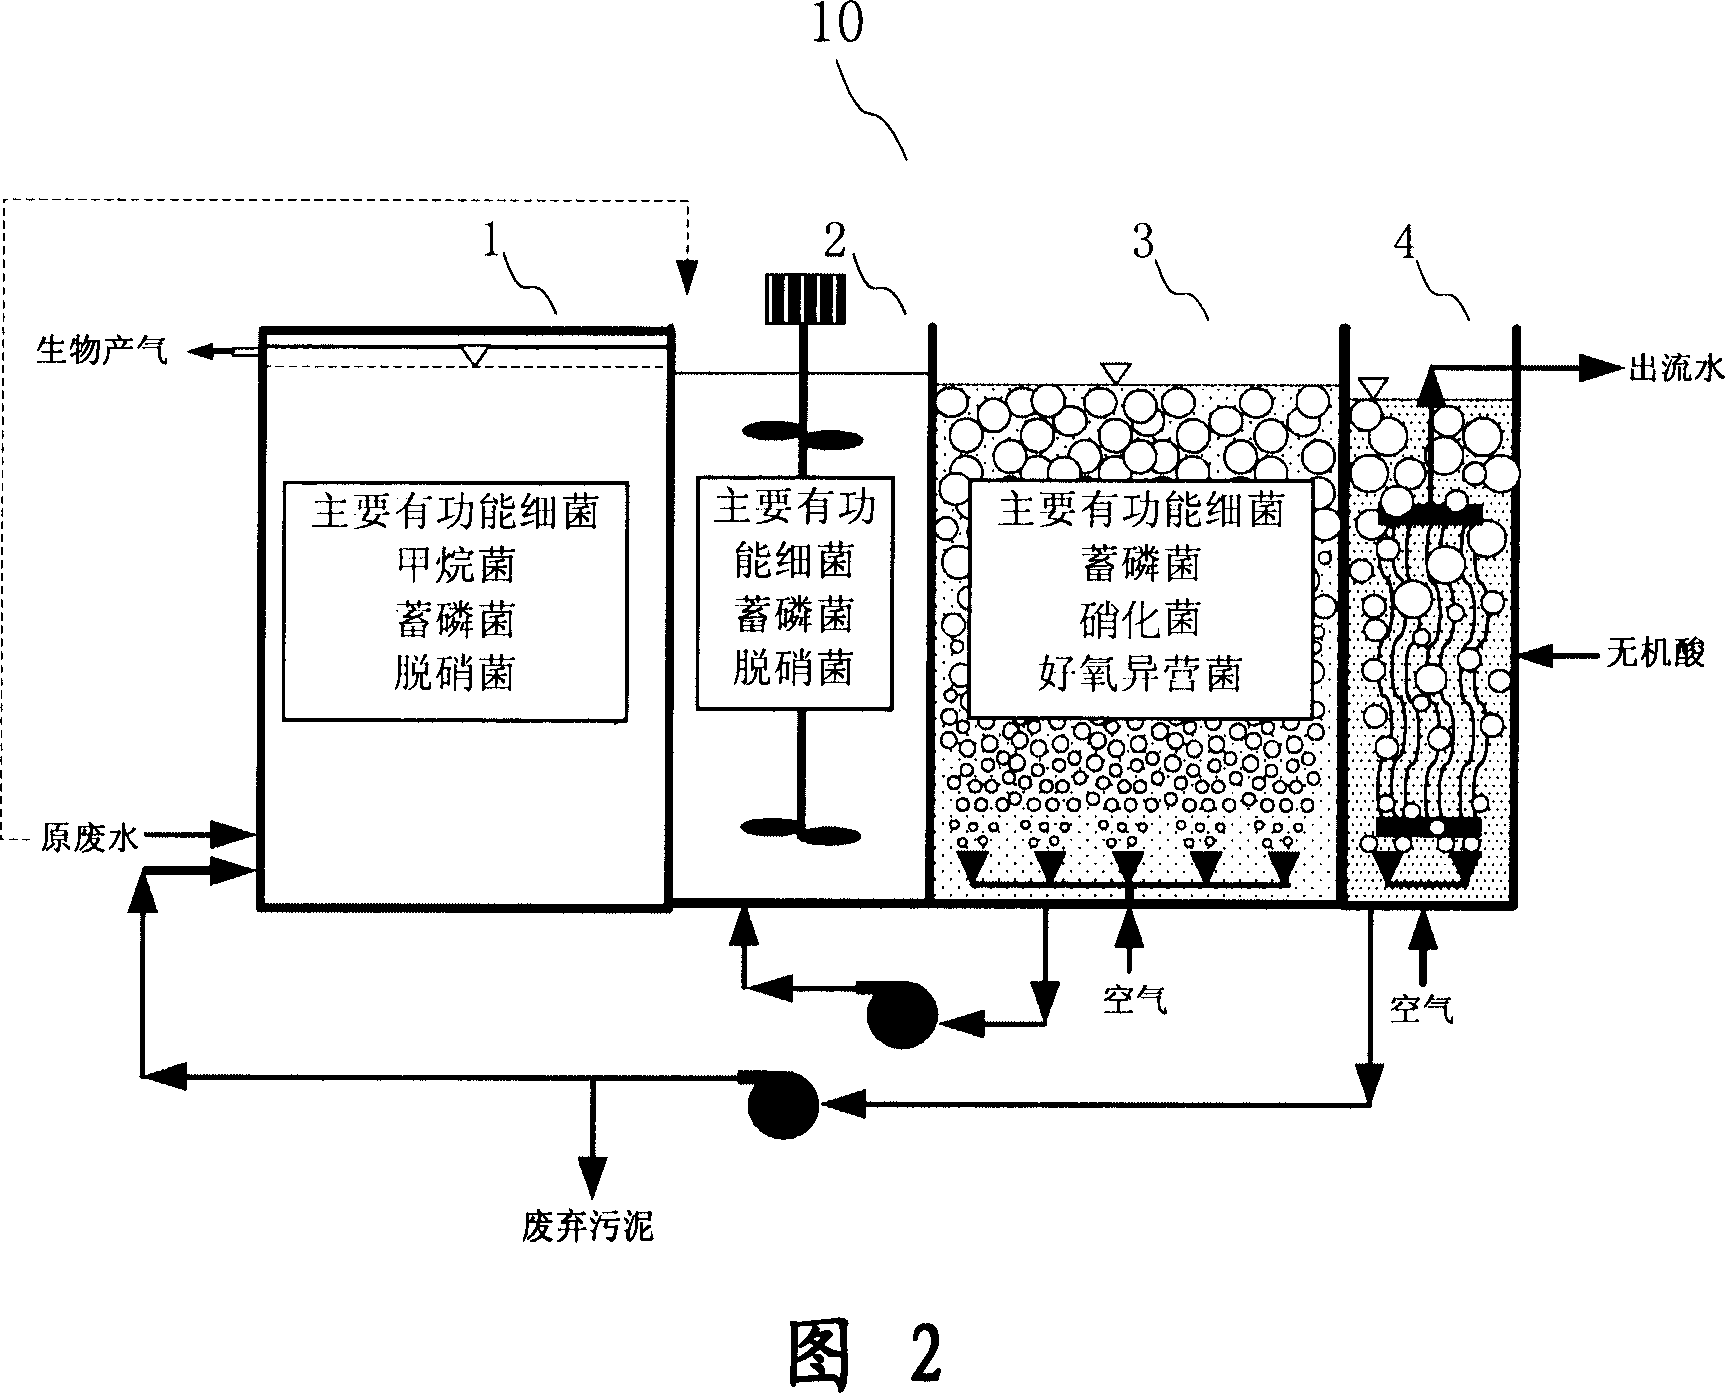 Wastewater treatment system and method for removing carbon, nitrogen, phosphor in wastewater